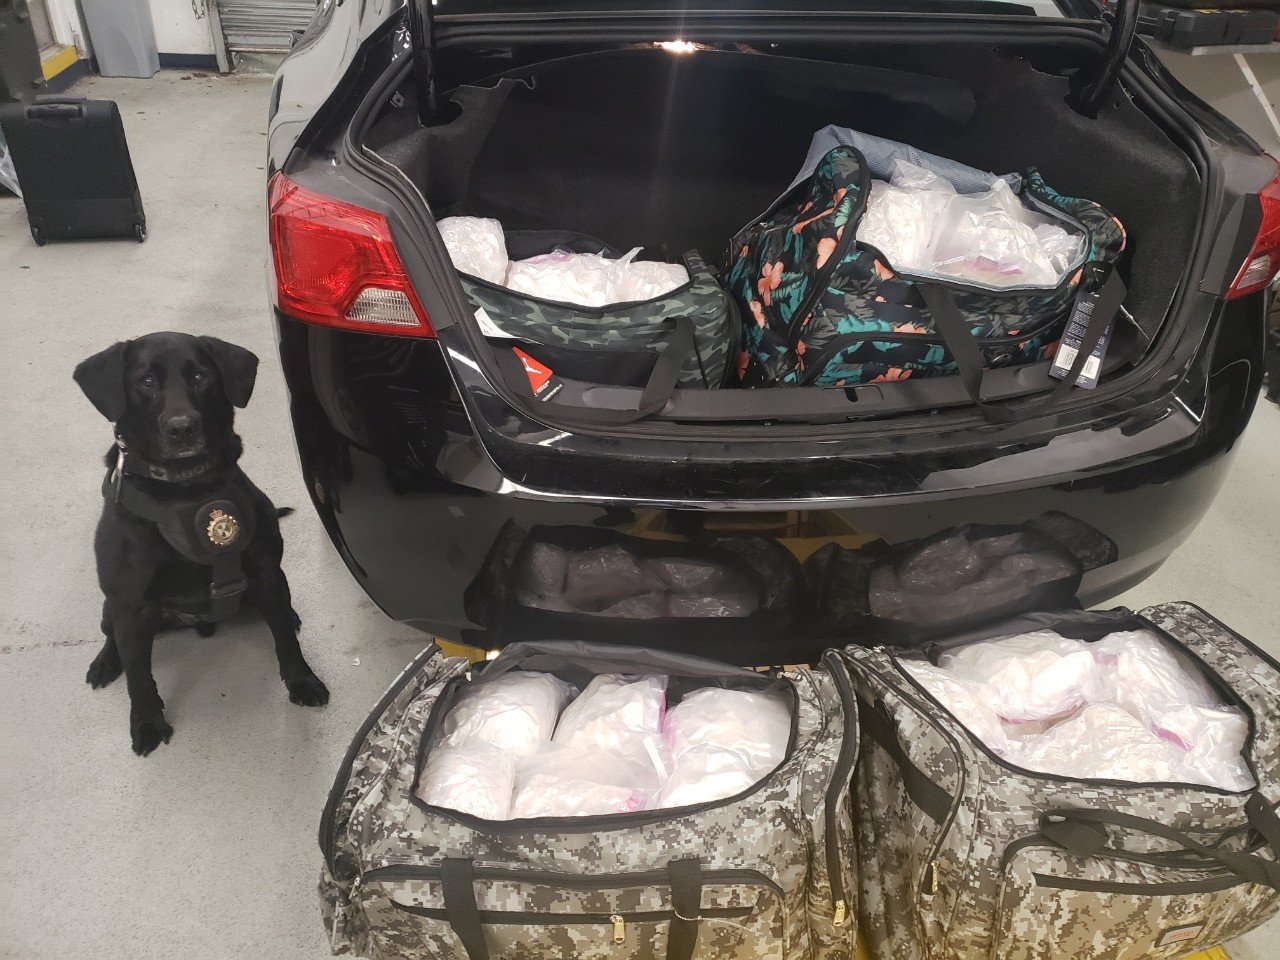 The Canada Border Services Agency and the Royal Canadian Mounted Police arrested a woman who allegedly attempted to smuggle 100 kilograms of methamphetamine into B.C. at the Blaine border crossing.